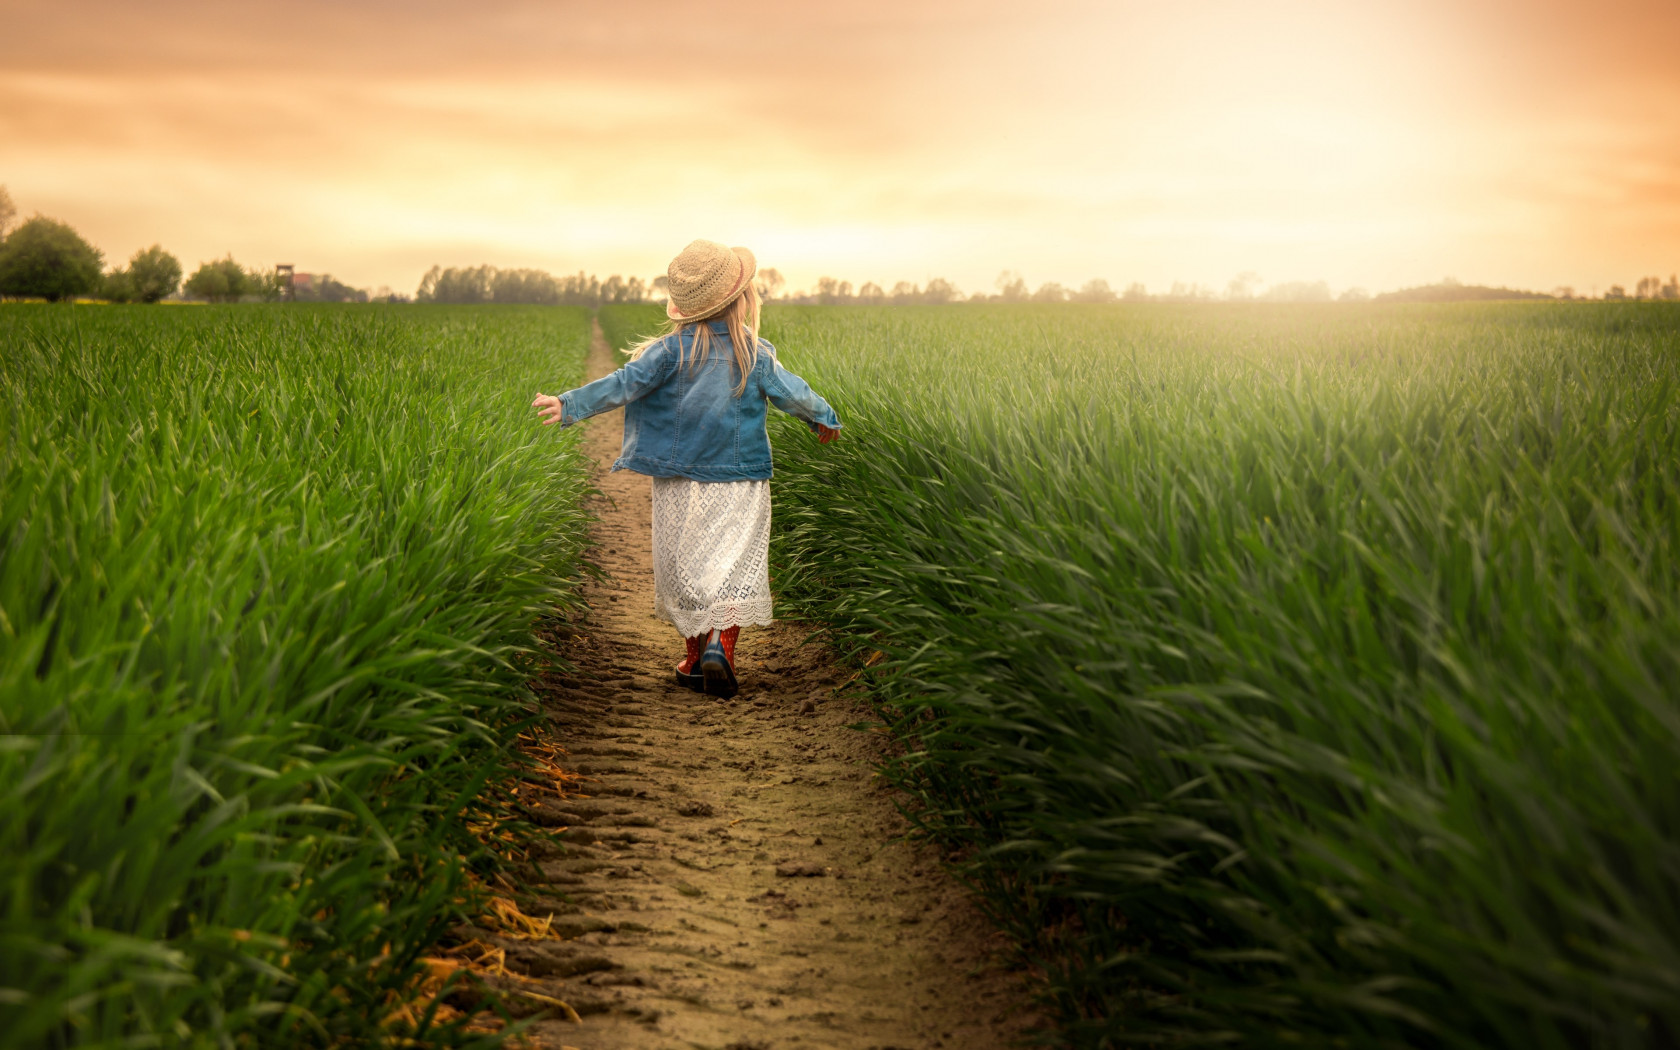 Child in the green field at sunset wallpaper 1680x1050